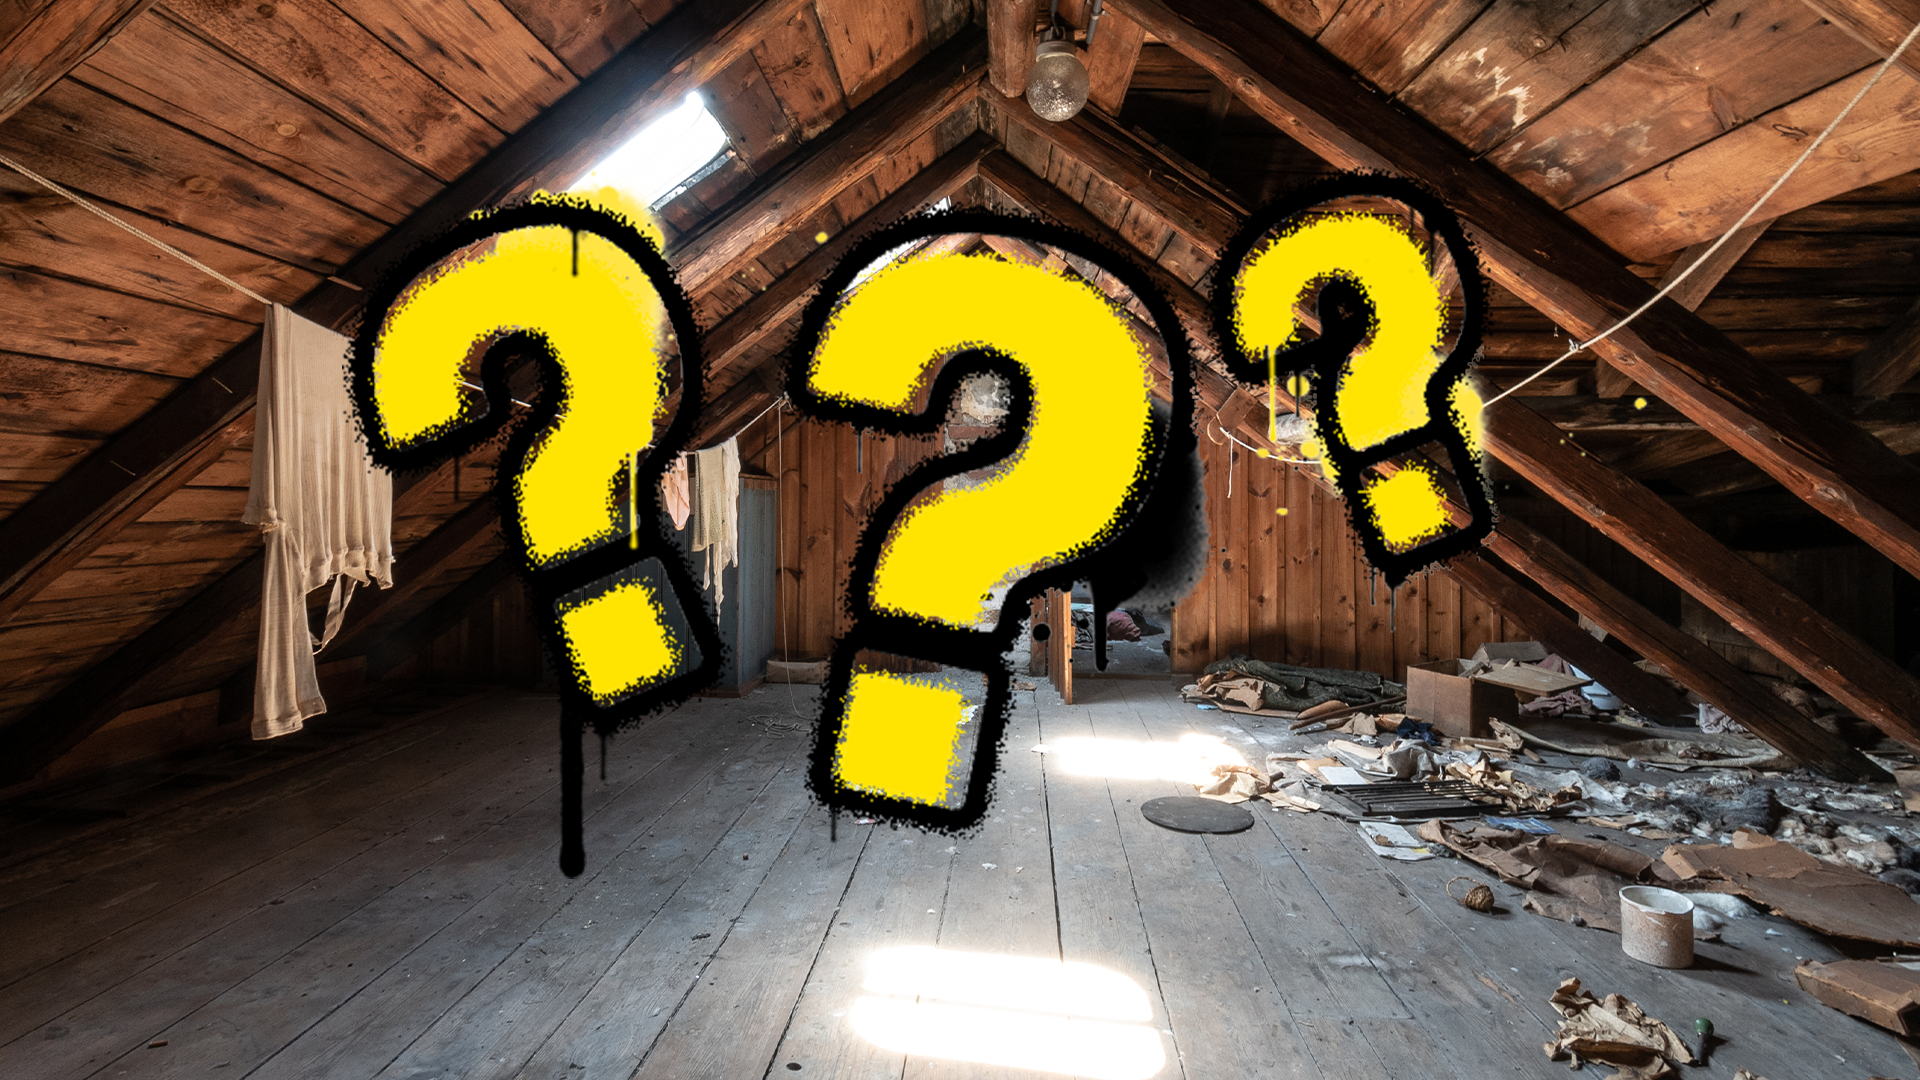 Spooky attic and question marks